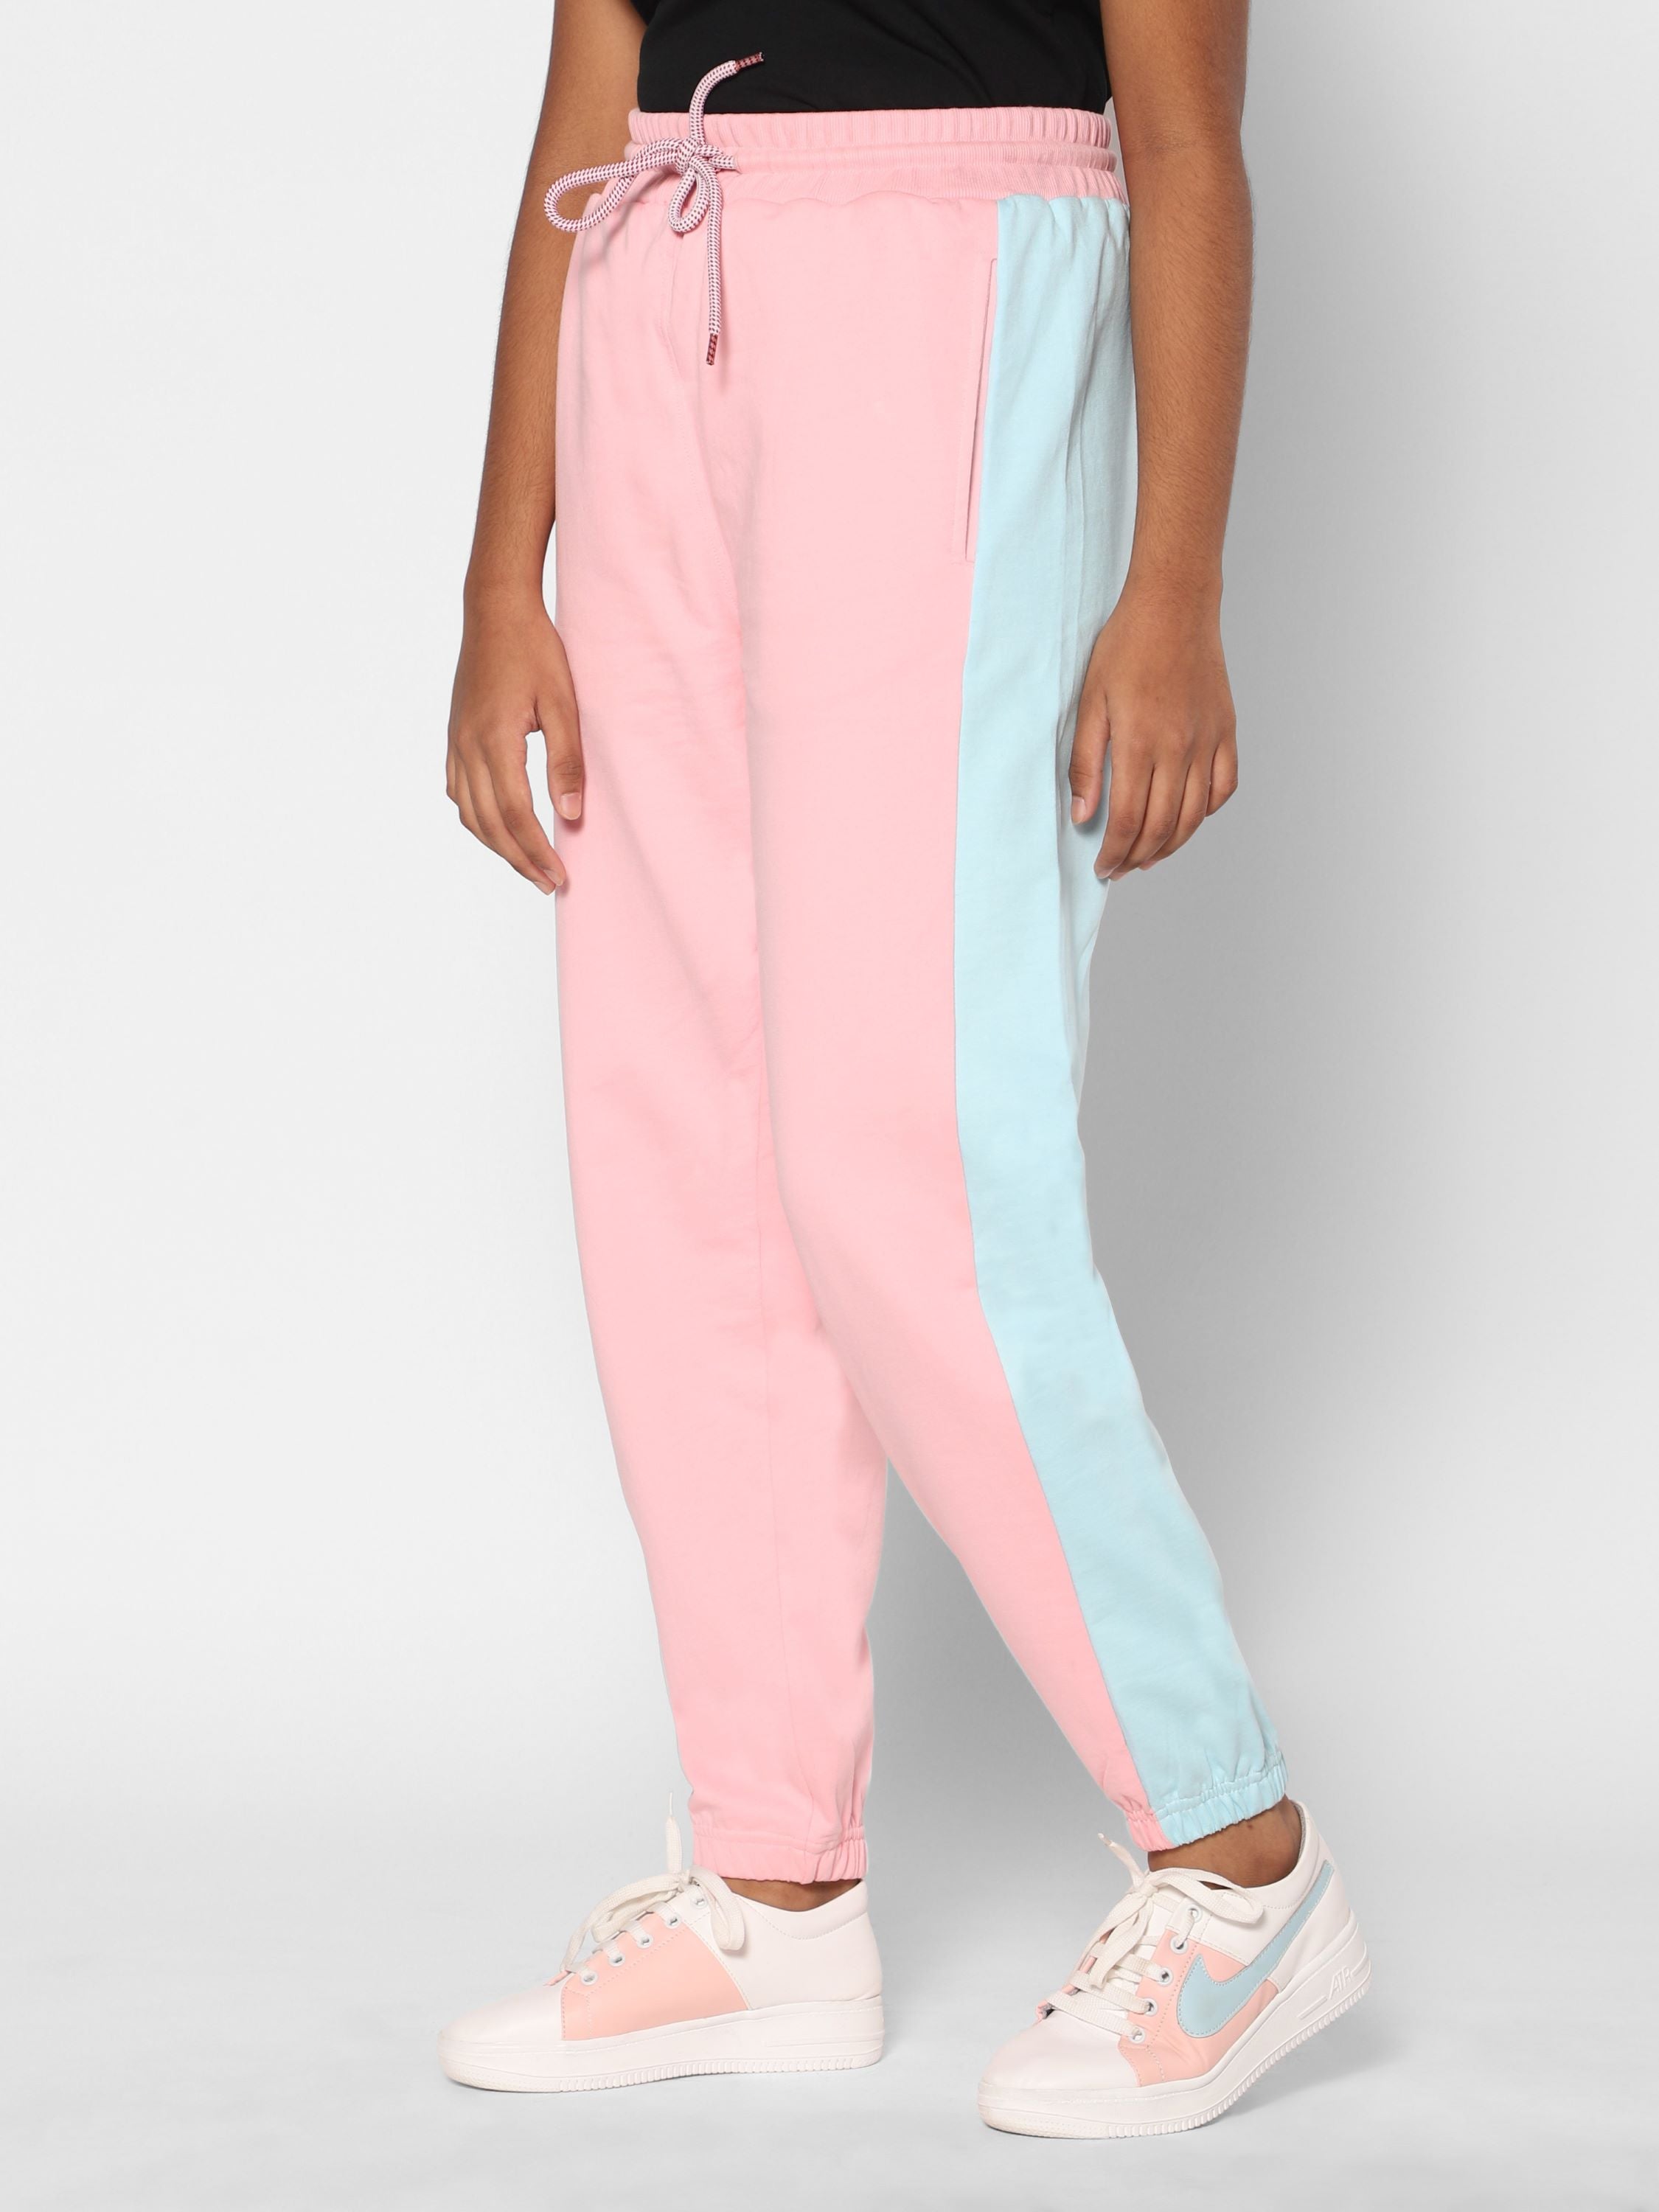 Buy Pink Track Pant For Women Online 8907279313300 At Rareism